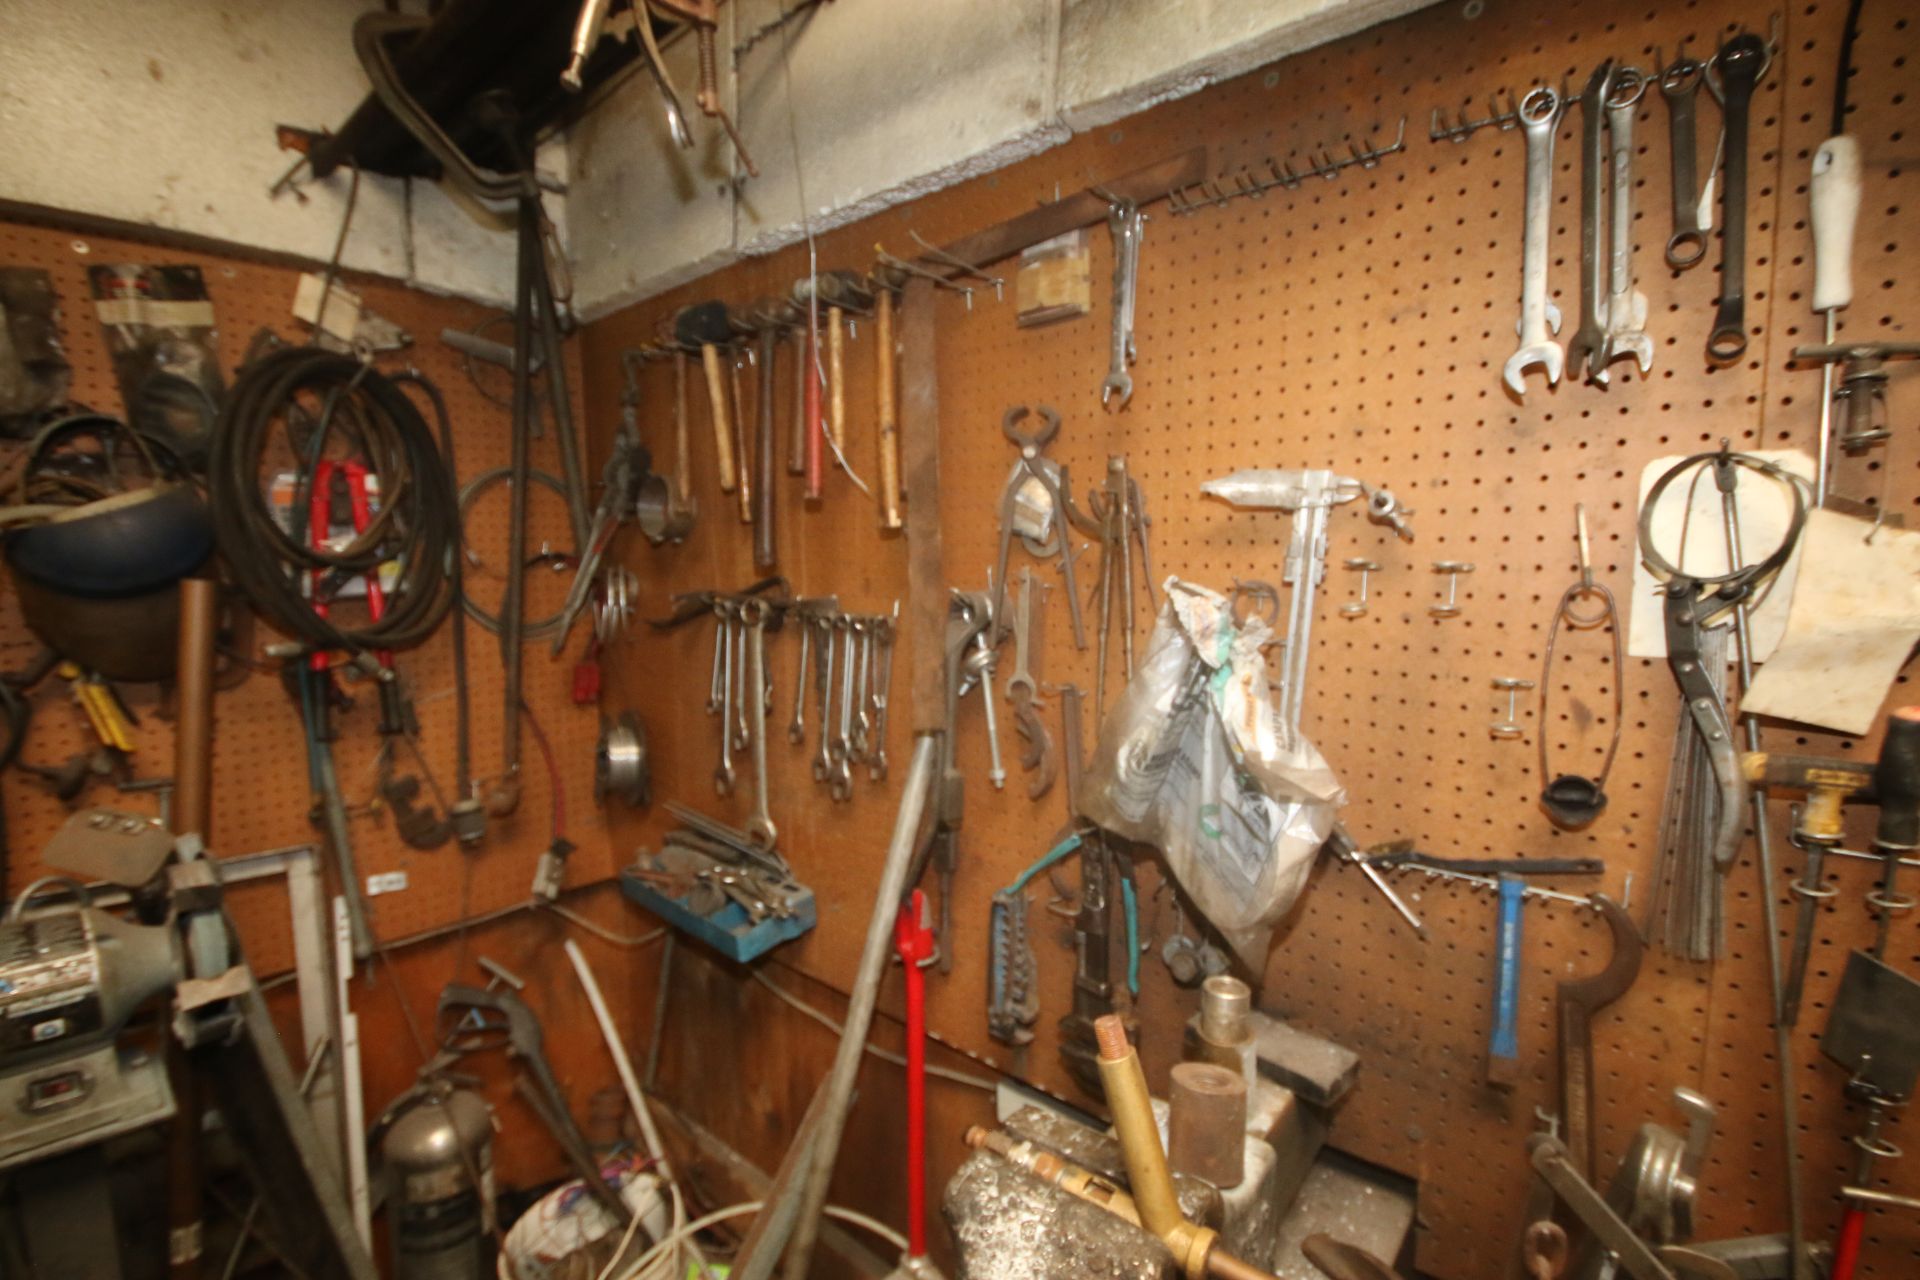 Large Assortment of Hand Tools, Includes Wrenches, Screw Drivers, Hammers, Saws, Hydraulic Tubing, - Image 4 of 7